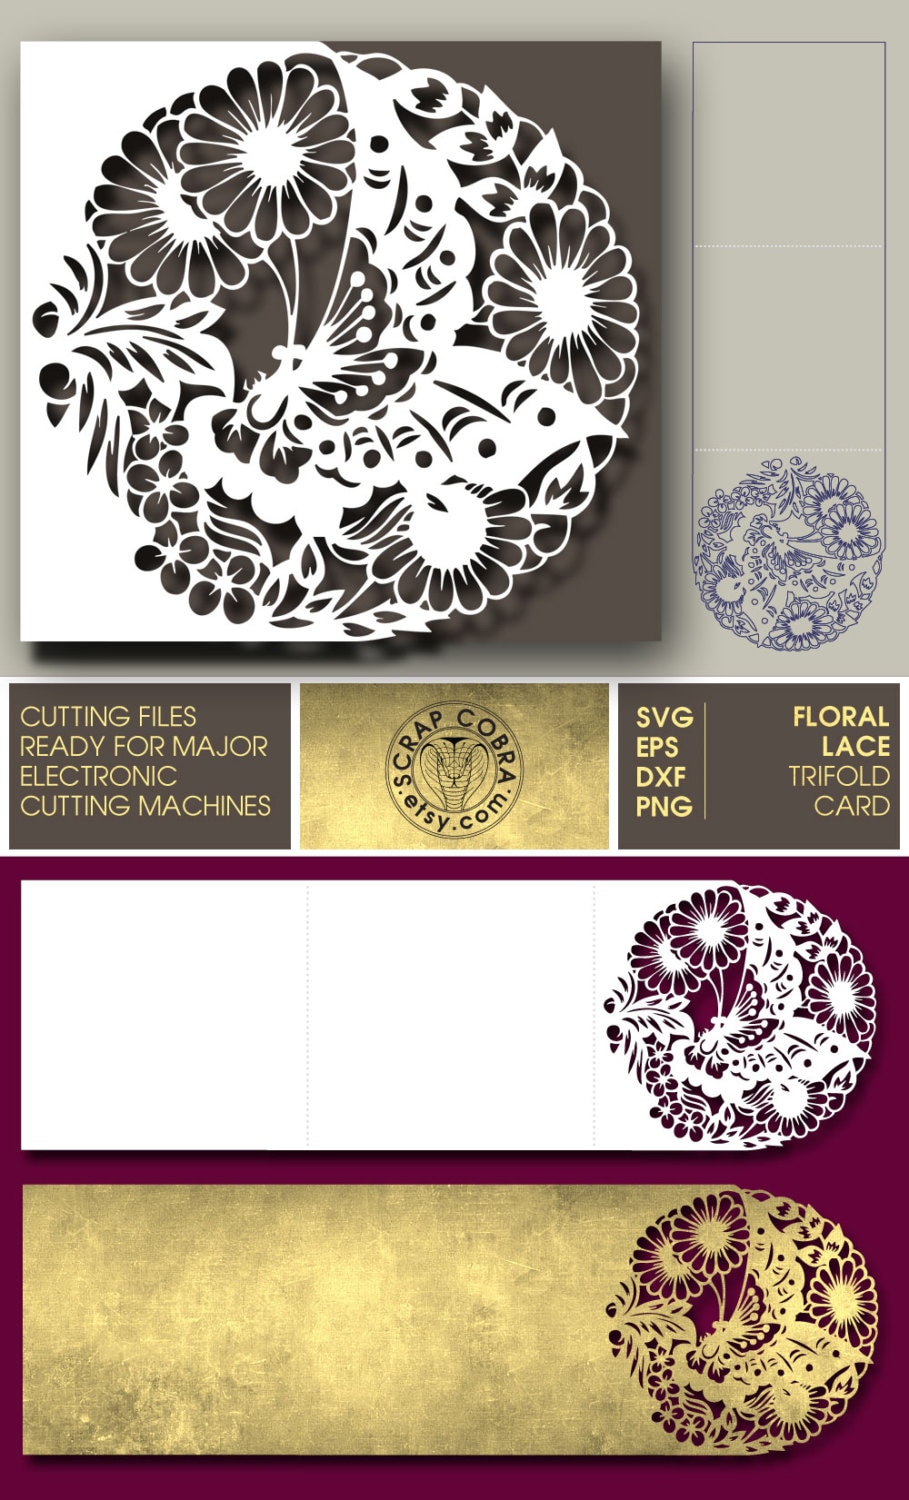 Download Floral Lace Card SVG eps DXF PNG Cut Files by ScrapCobra ...